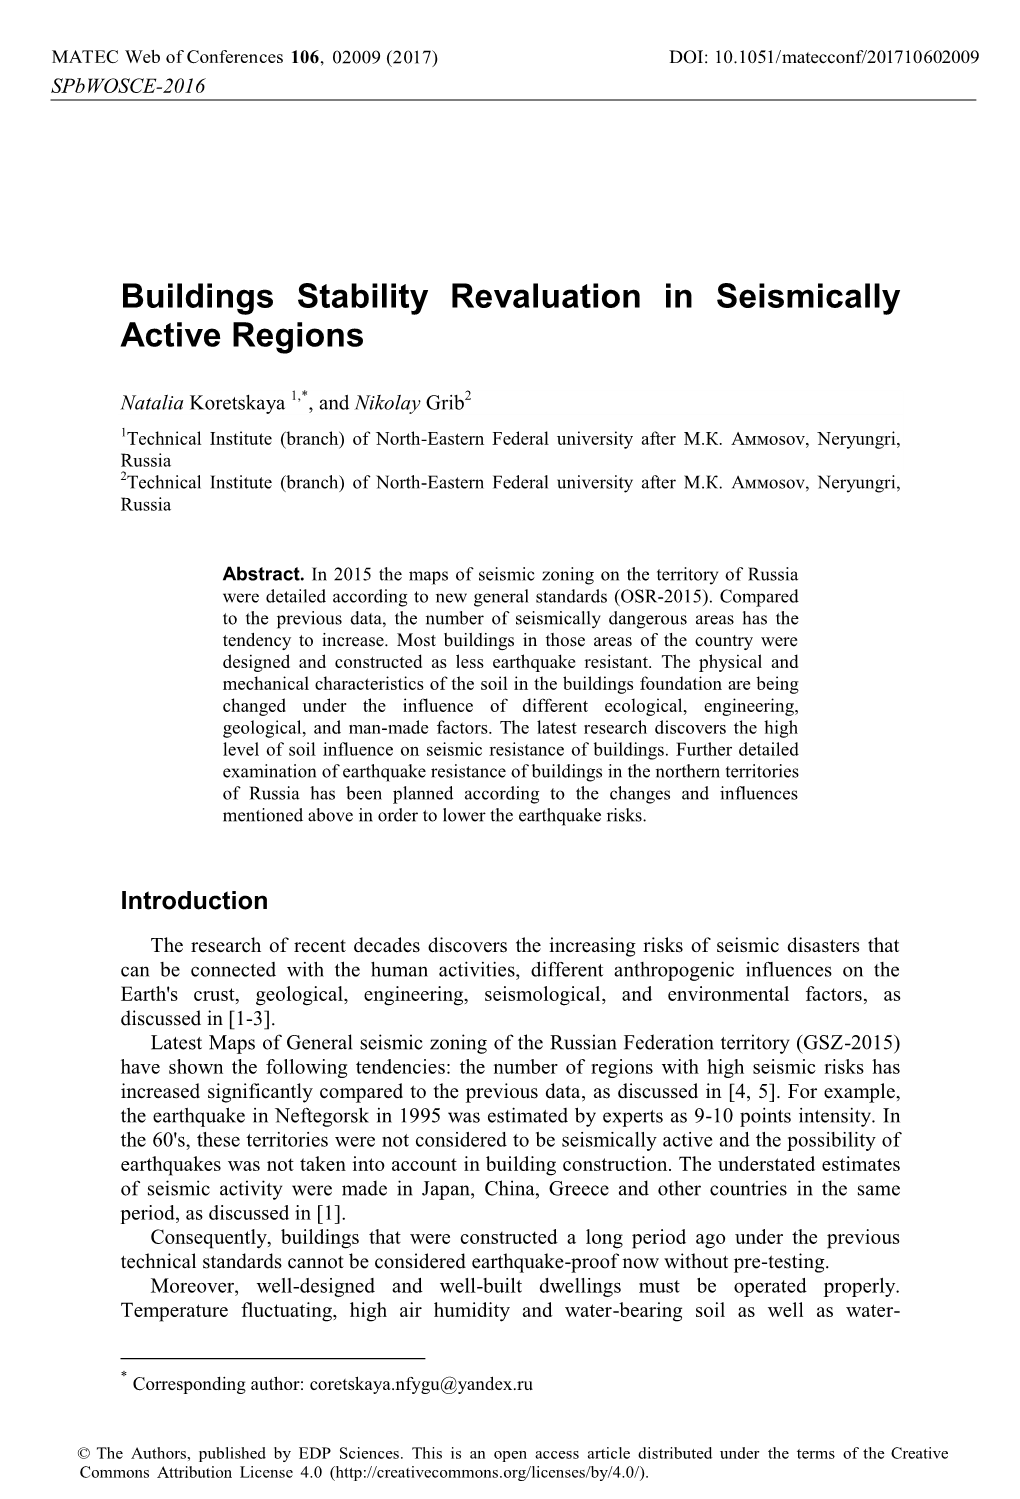 Buildings Stability Revaluation in Seismically Active Regions